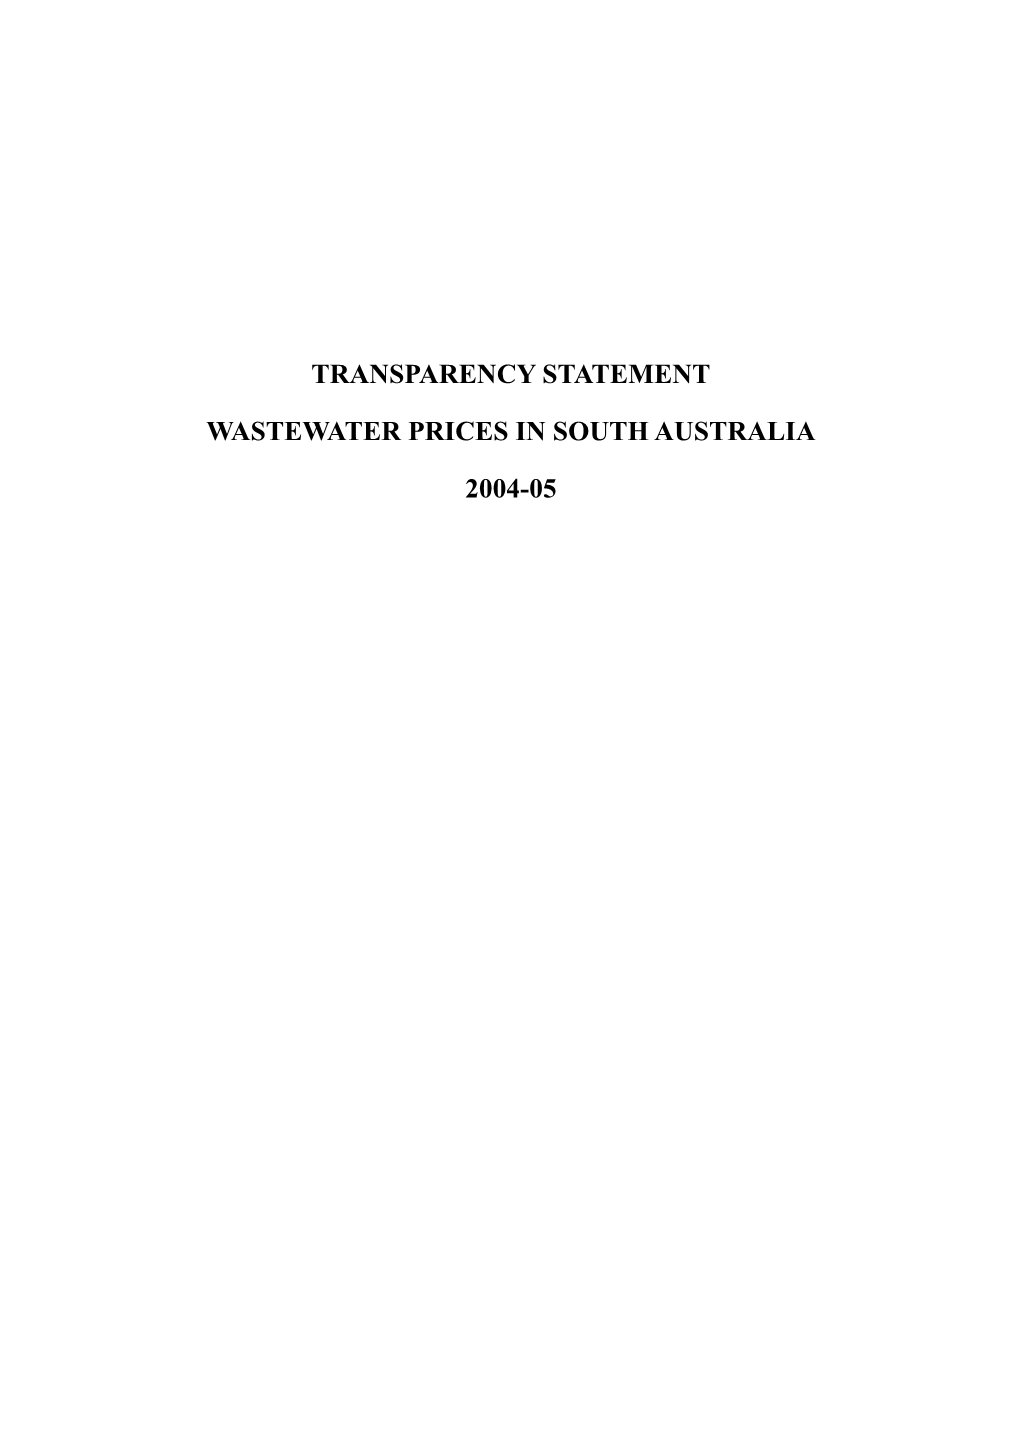 Transparency Statement Wastewater Prices in South